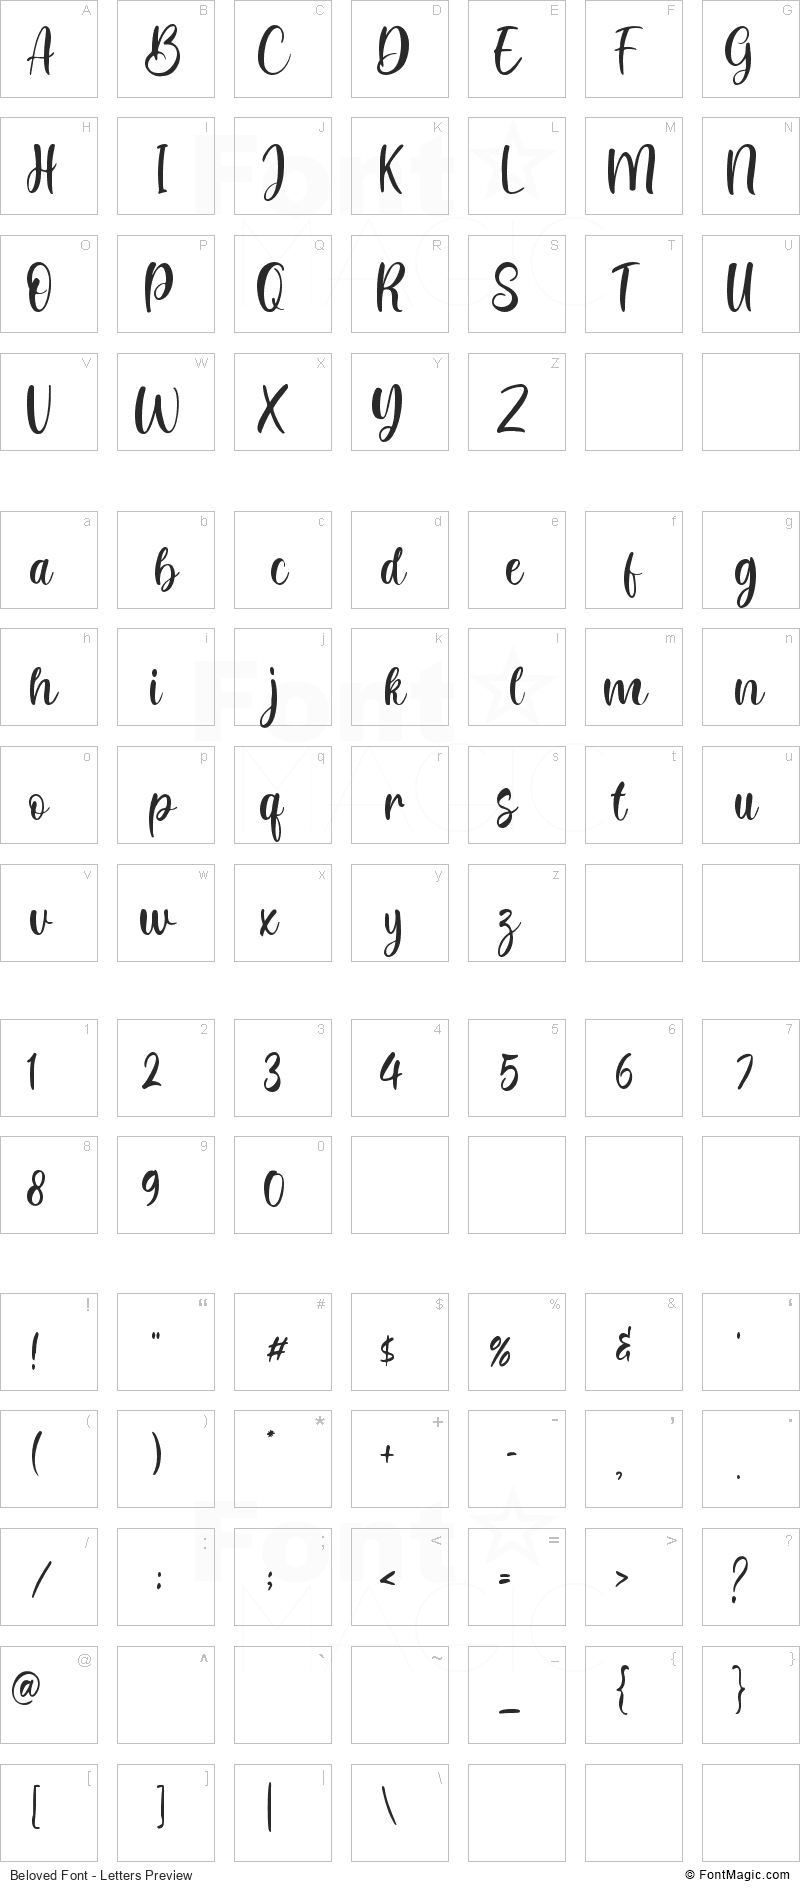 Beloved Font - All Latters Preview Chart